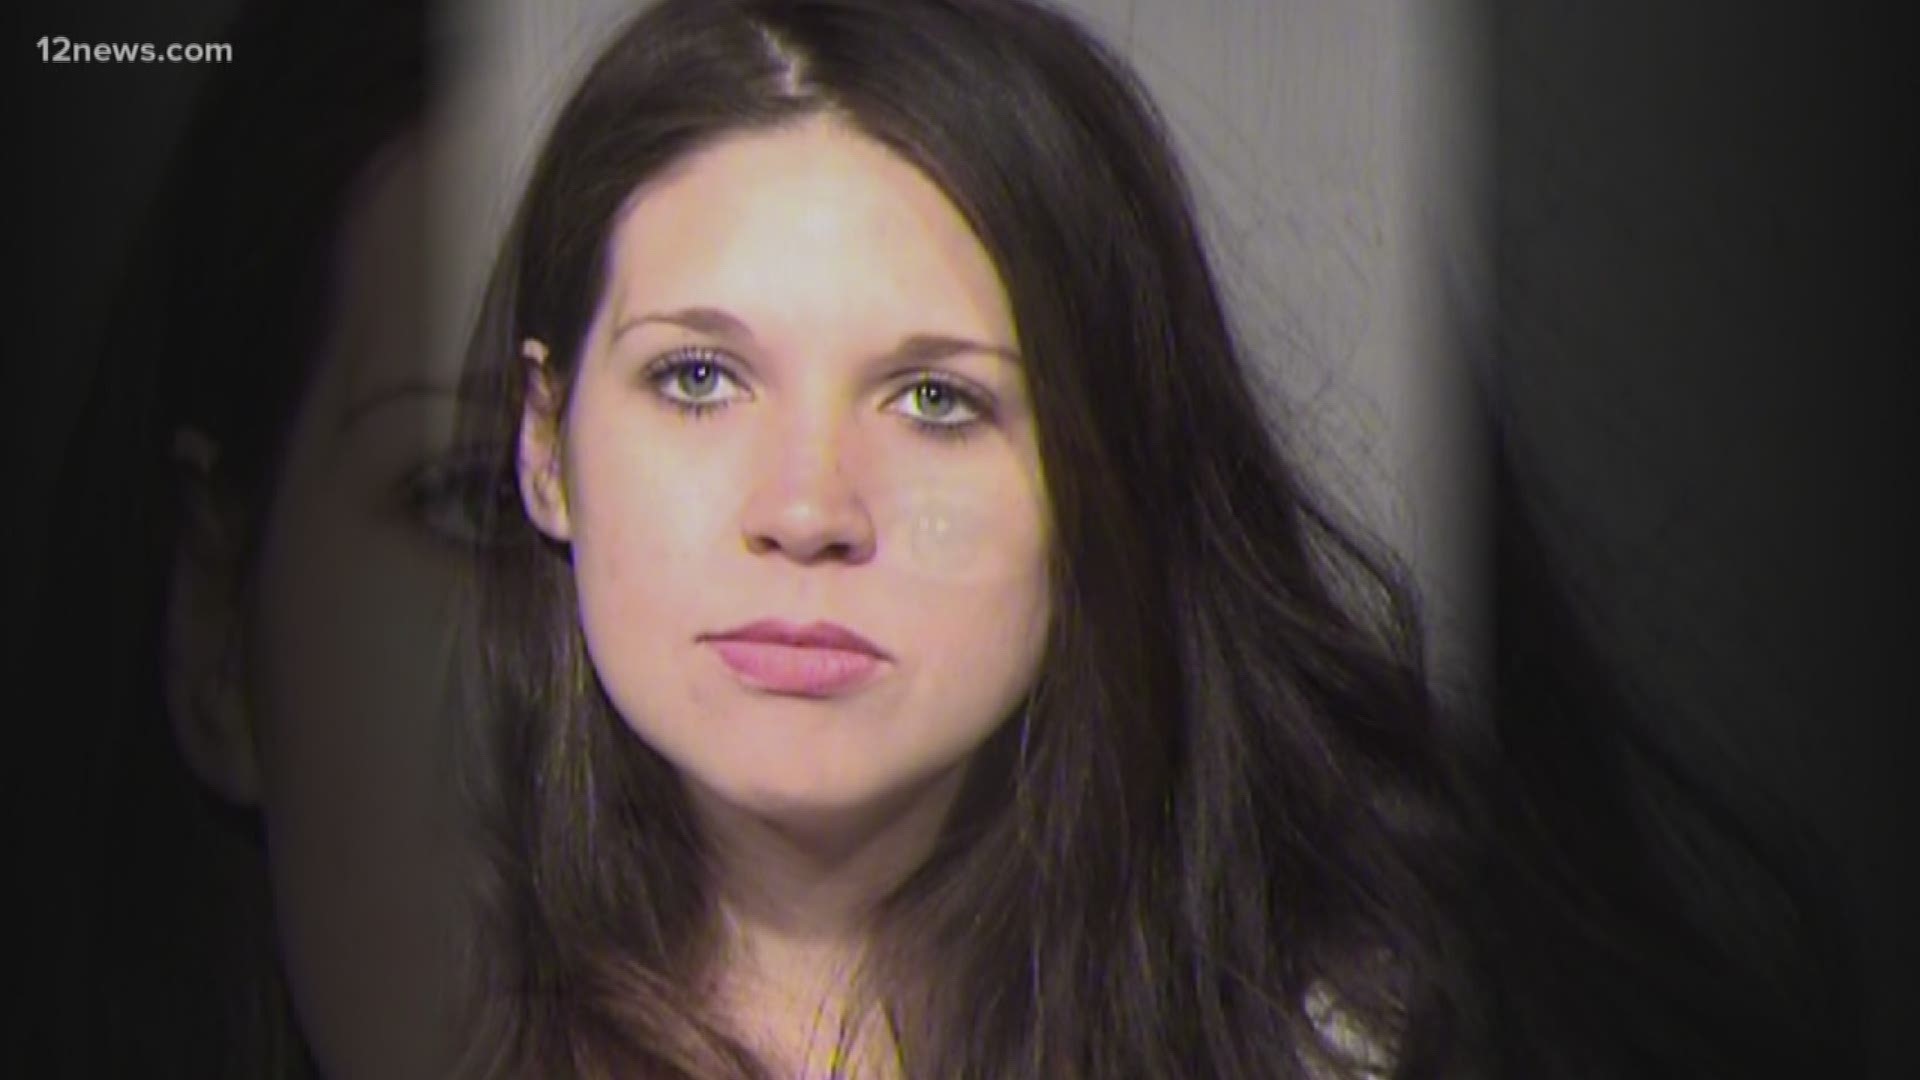 A Tempe mom was arrested after her 1-year-old ate macaroni and cheese made with THC butter, court documents show.